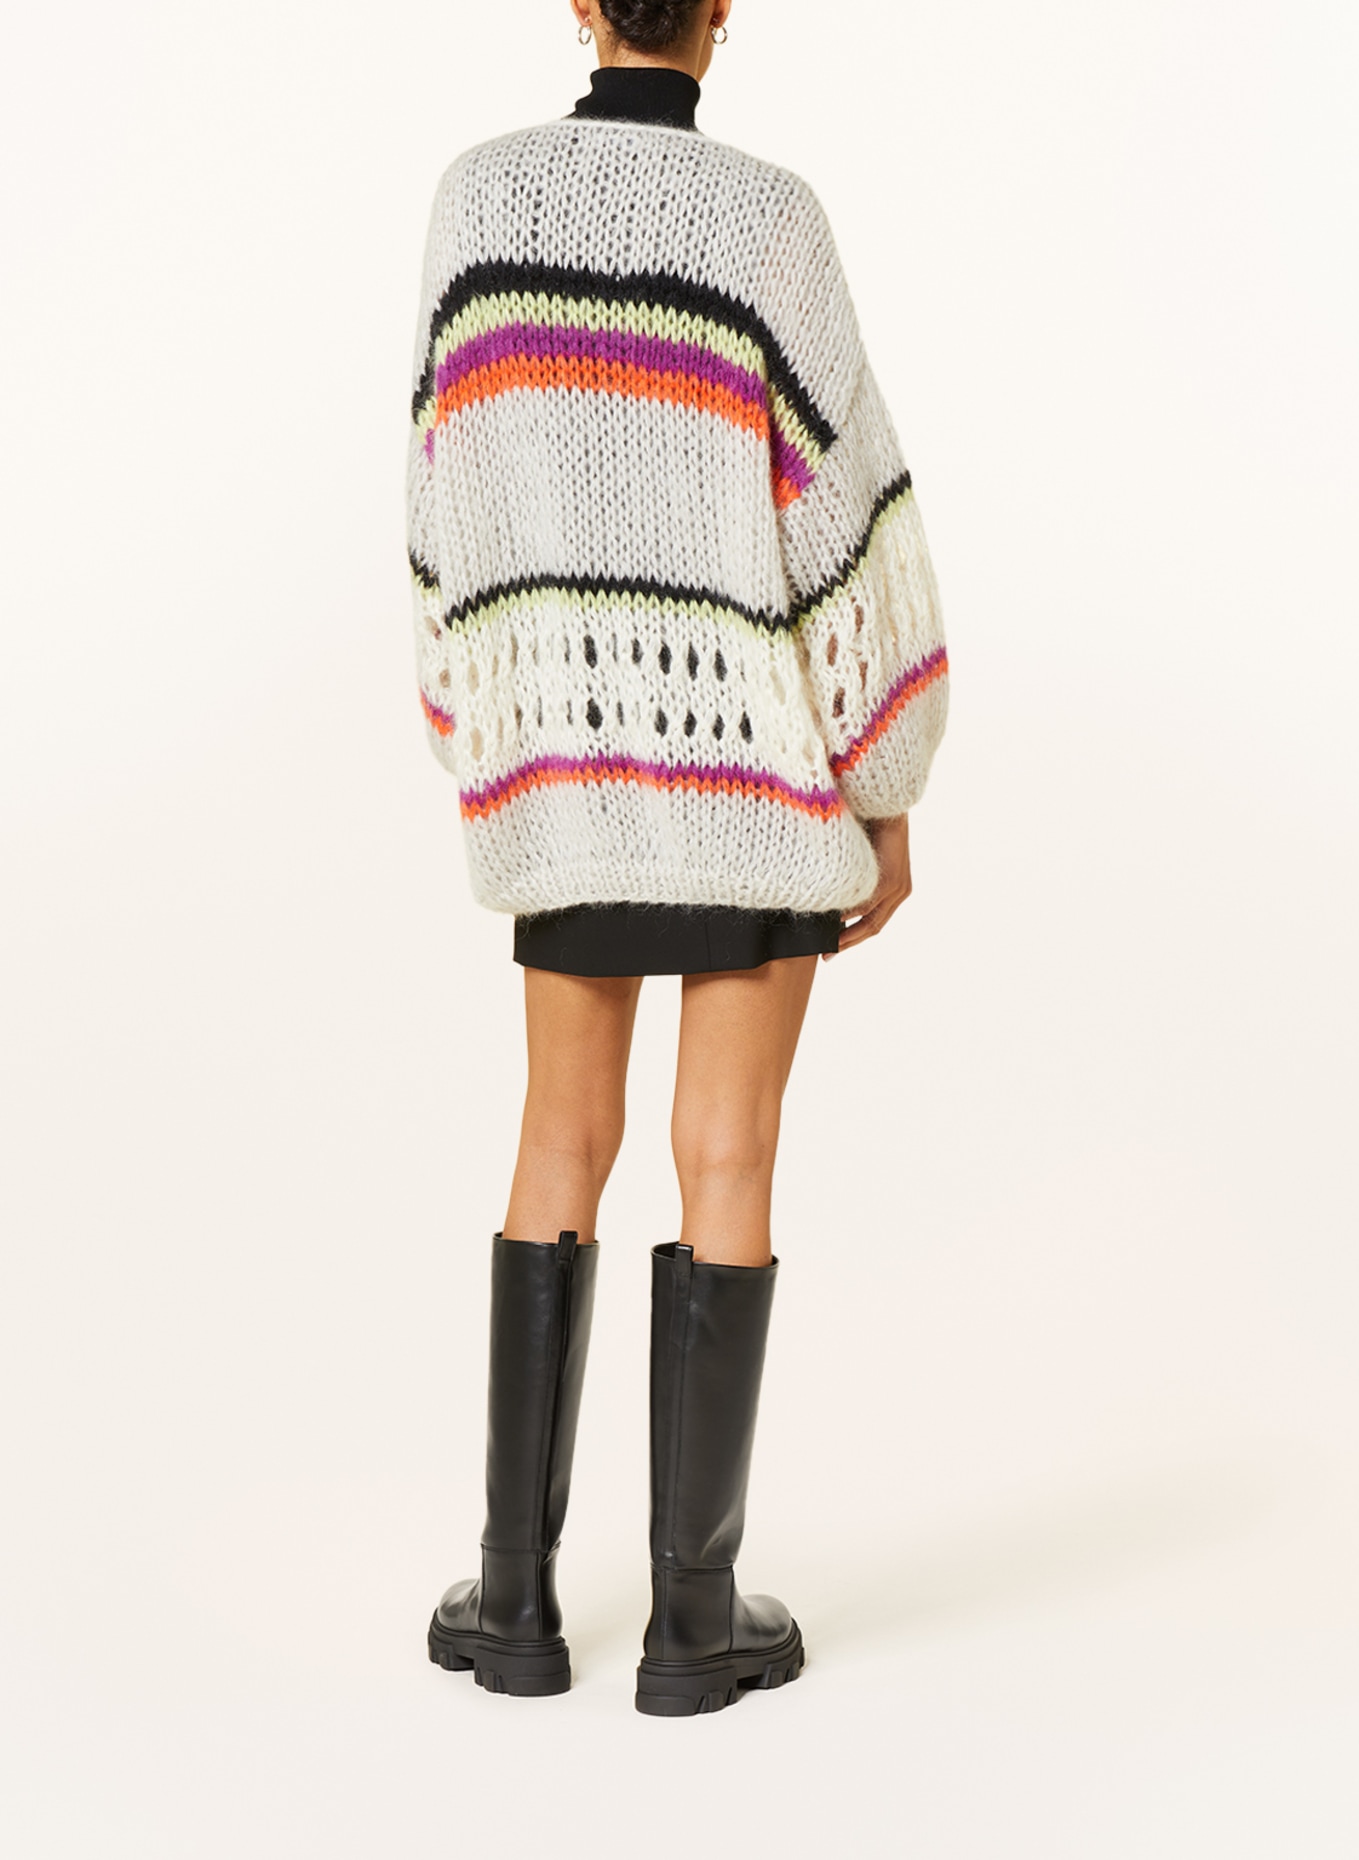 MAIAMI Knit cardigan with mohair, Color: LIGHT GRAY/ ECRU/ PURPLE (Image 3)